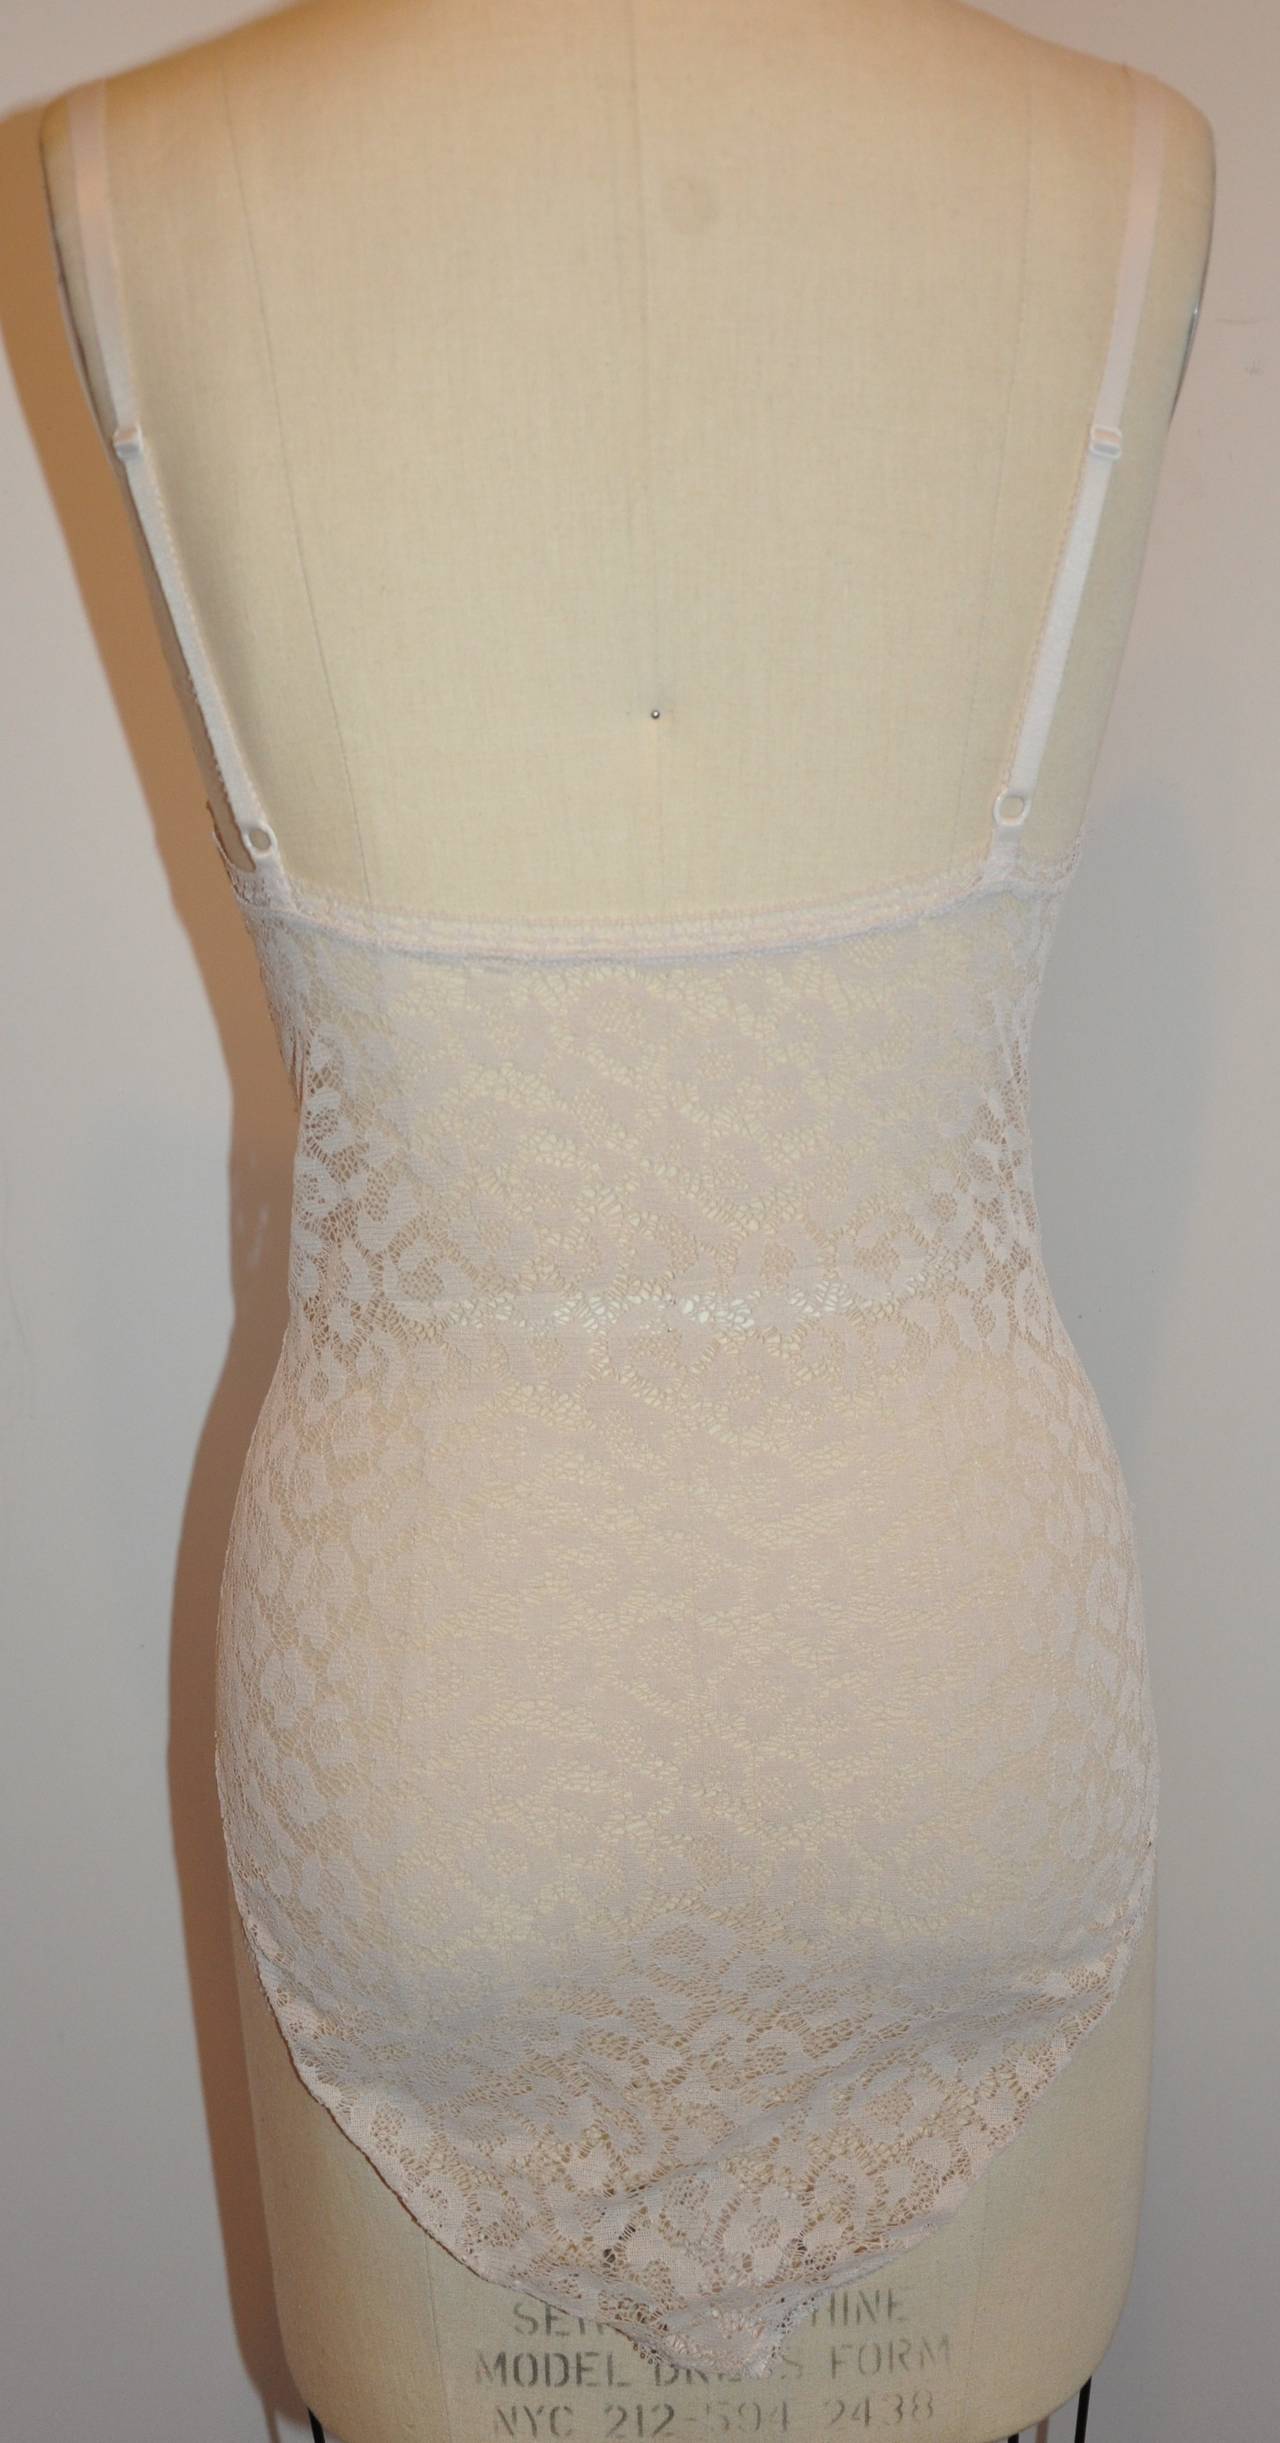 ERES ivory floral lace bodysuit is size 40/French. The bodysuit has three optional hook-&-eye at the crotch to adjust if desired for a better fit.